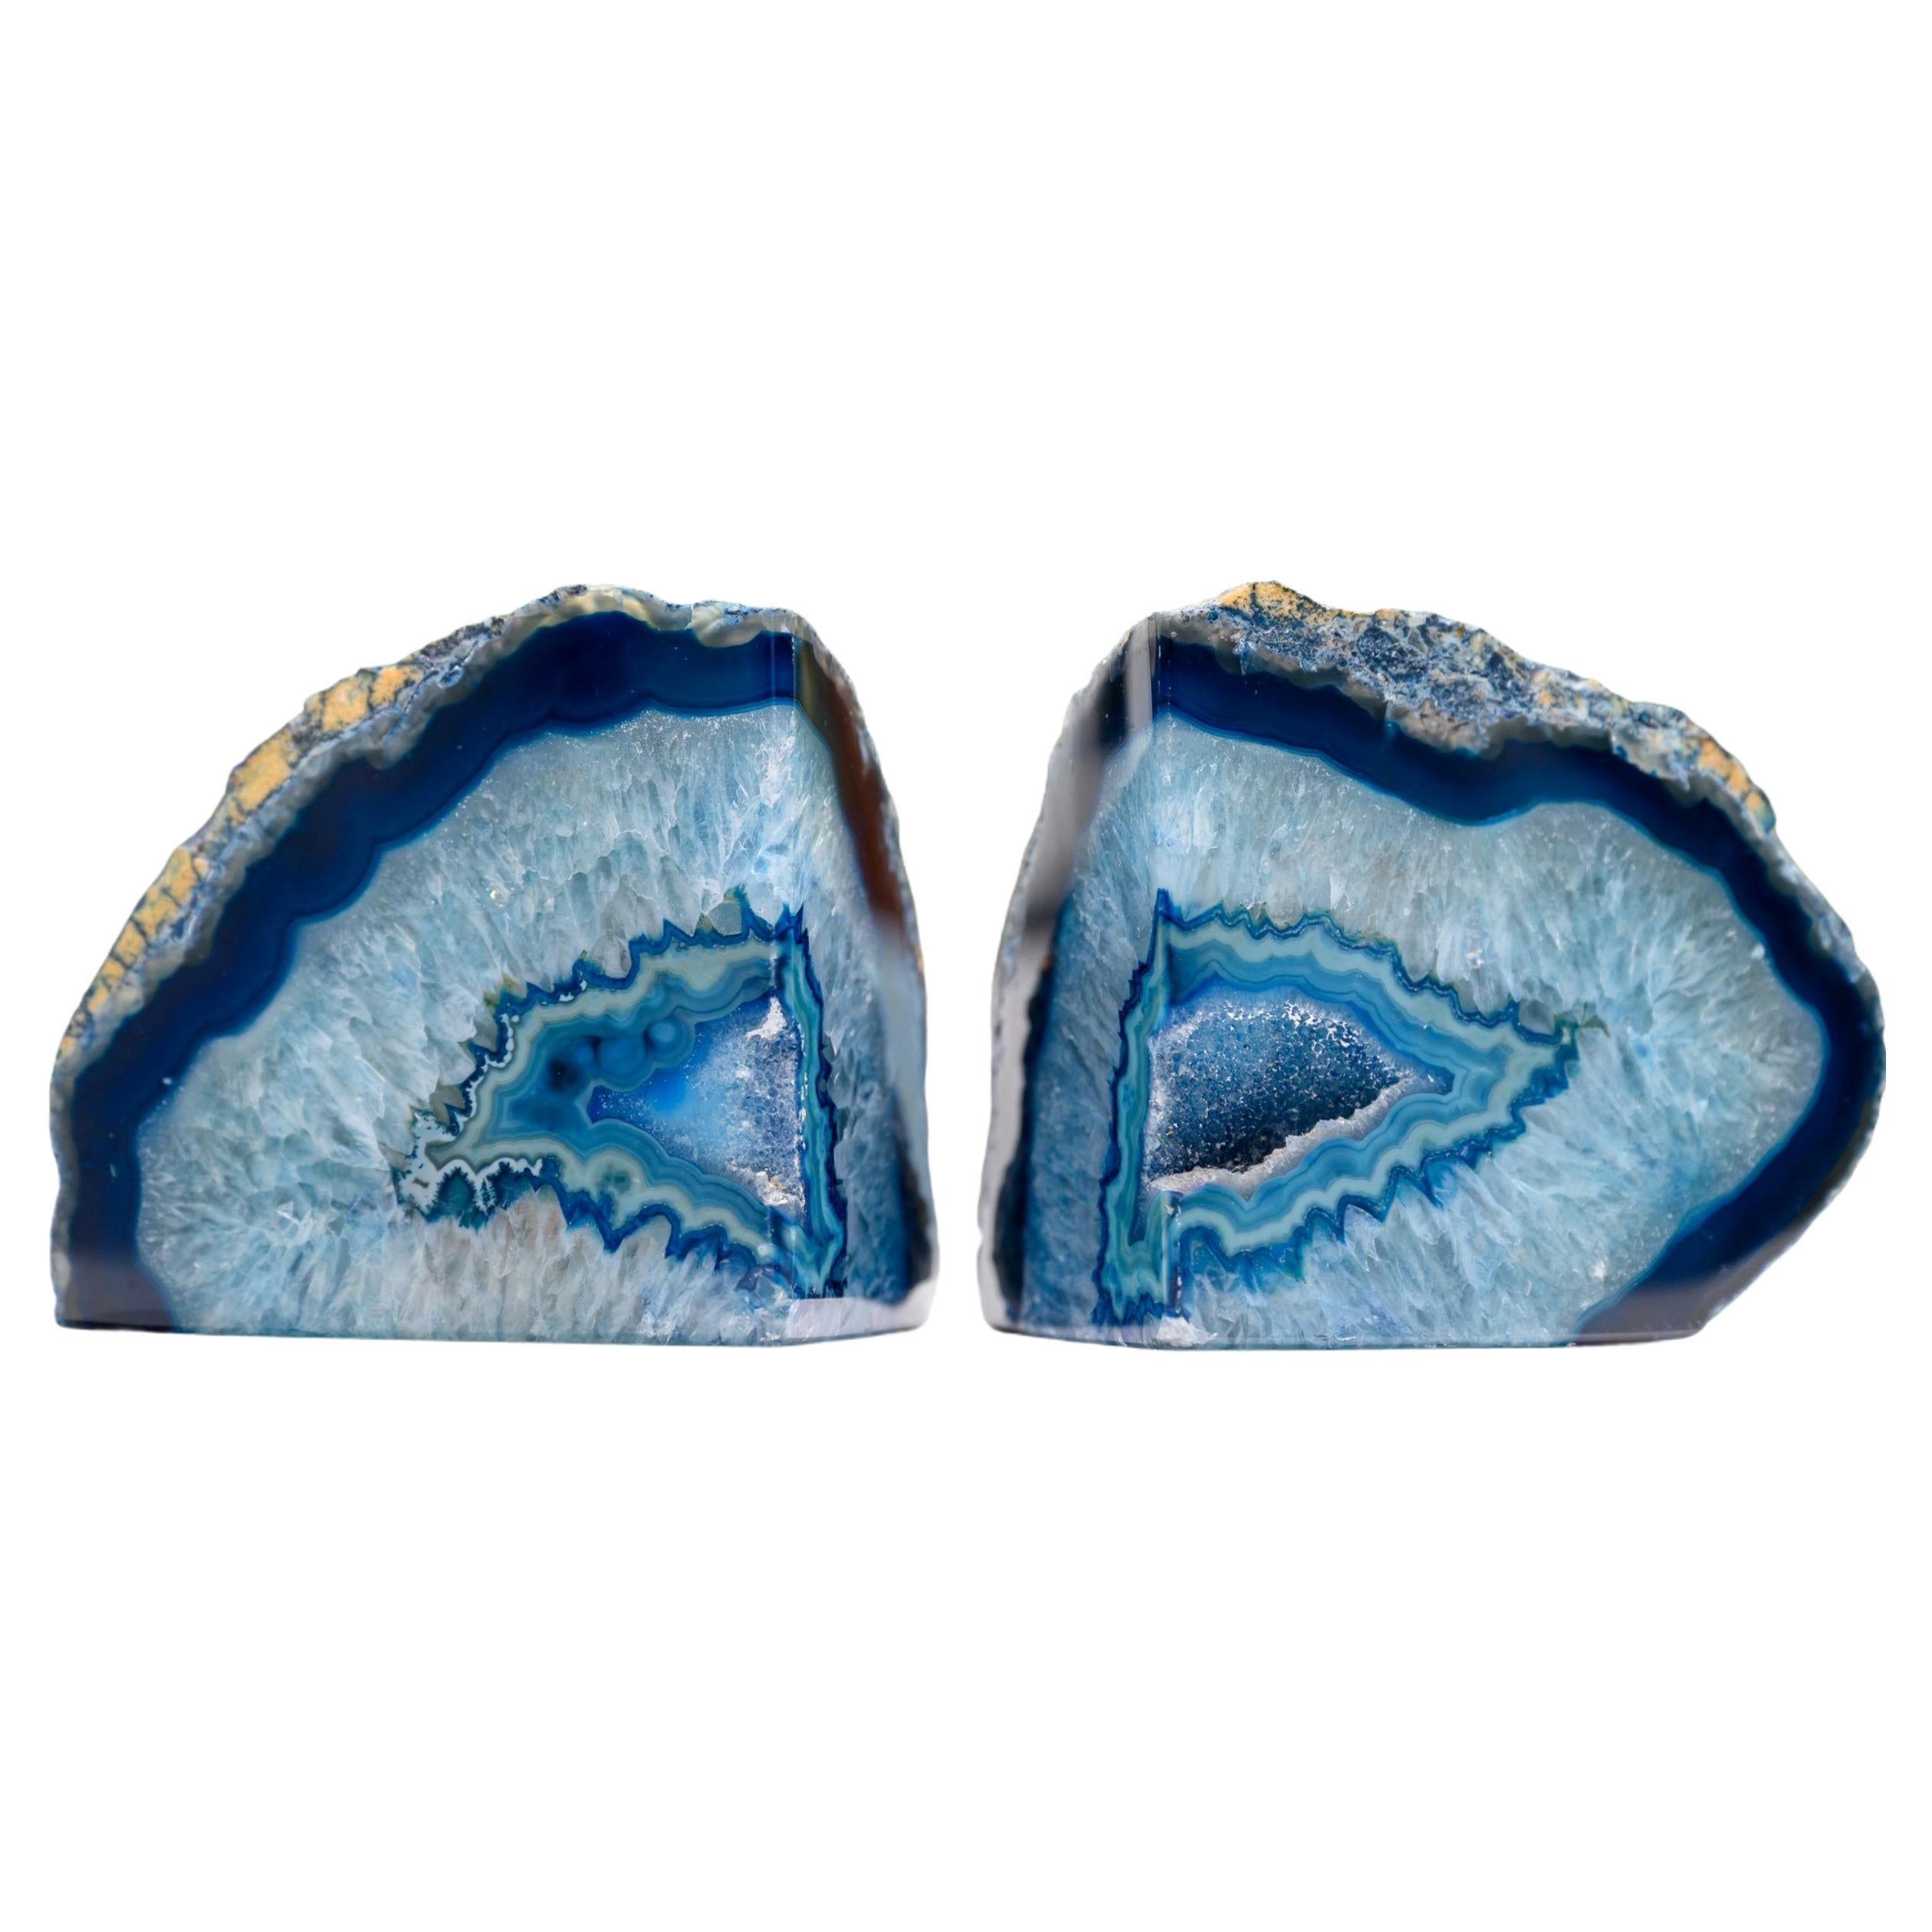 Pair of Blue Organic Geode Bookends